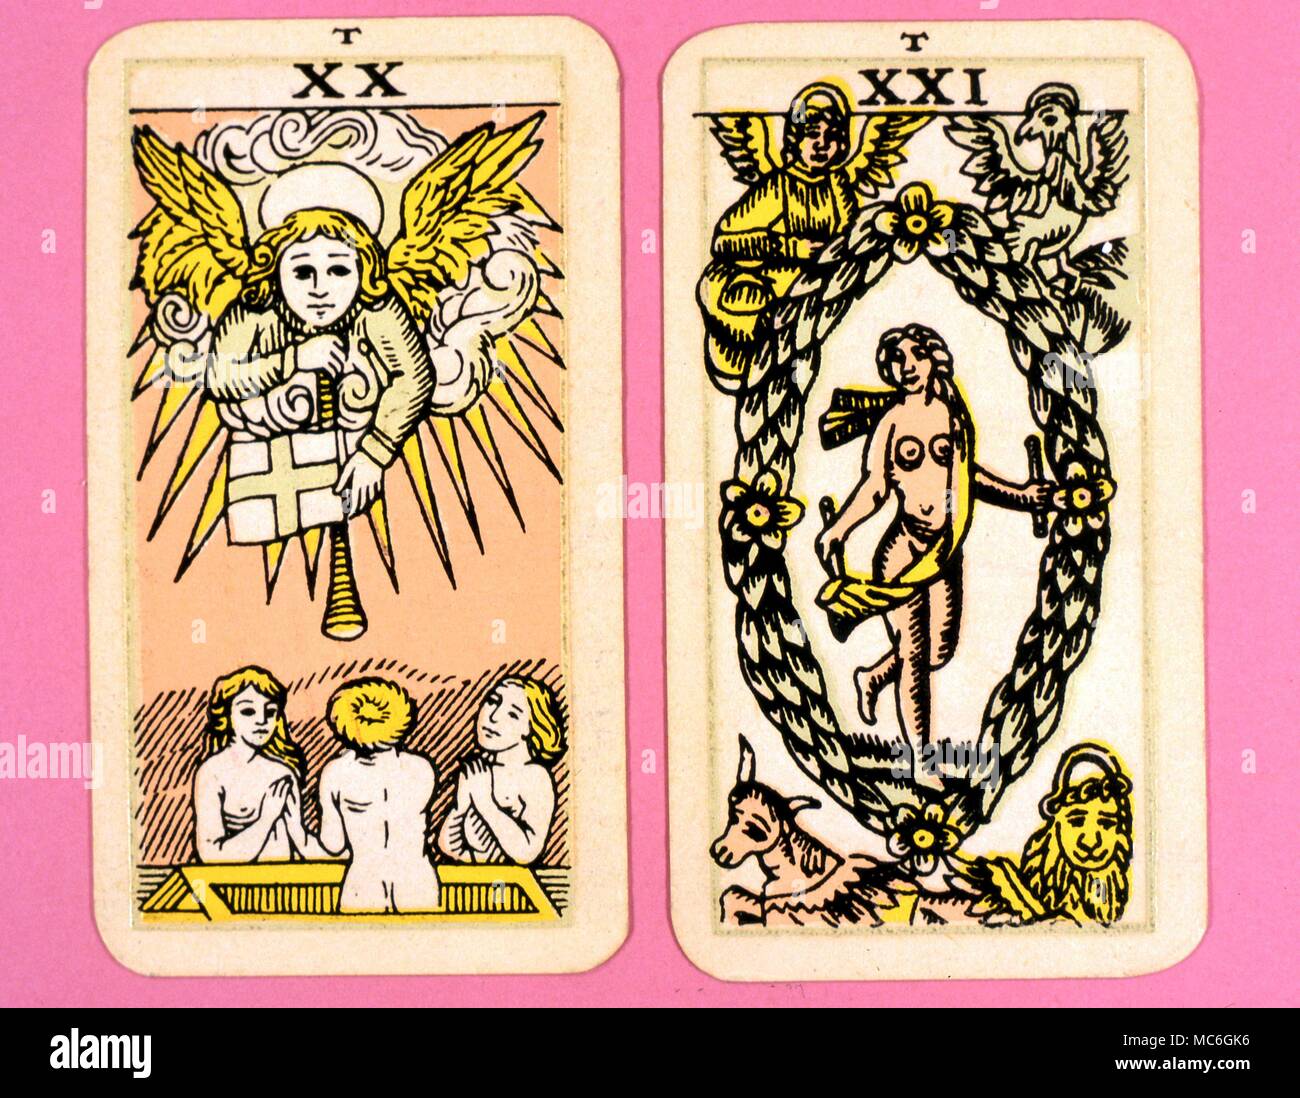 Tarot Cards-Majo Arcana- The Parisian Tarot. Card 20. The Judgement, and Card  21. The World. Two cards from a Major Arcana picture Tarot,adapted by a  Wiccan group. Probably designed in an archaizing